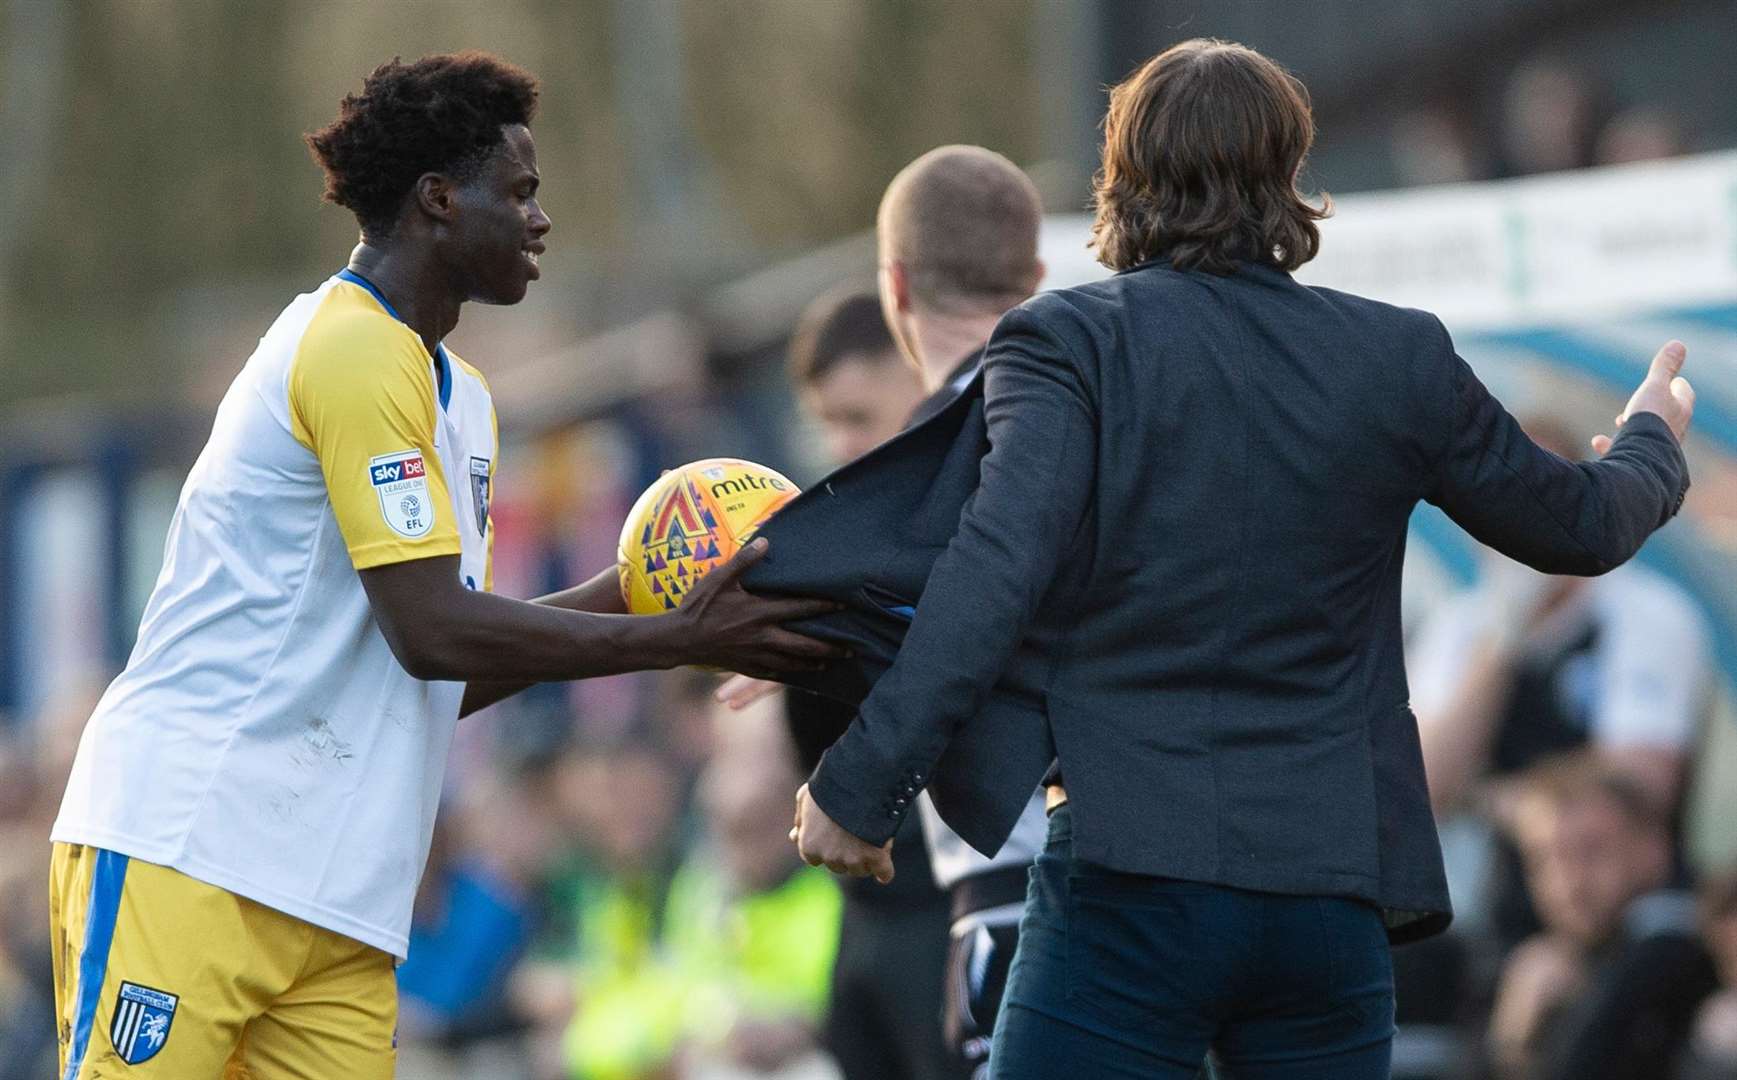 Gills' Leo Da Silva Lopes apears to cheekily dry the ball on Wycombe manager Gareth Ainsworth's jacket Picture: Ady Kerry